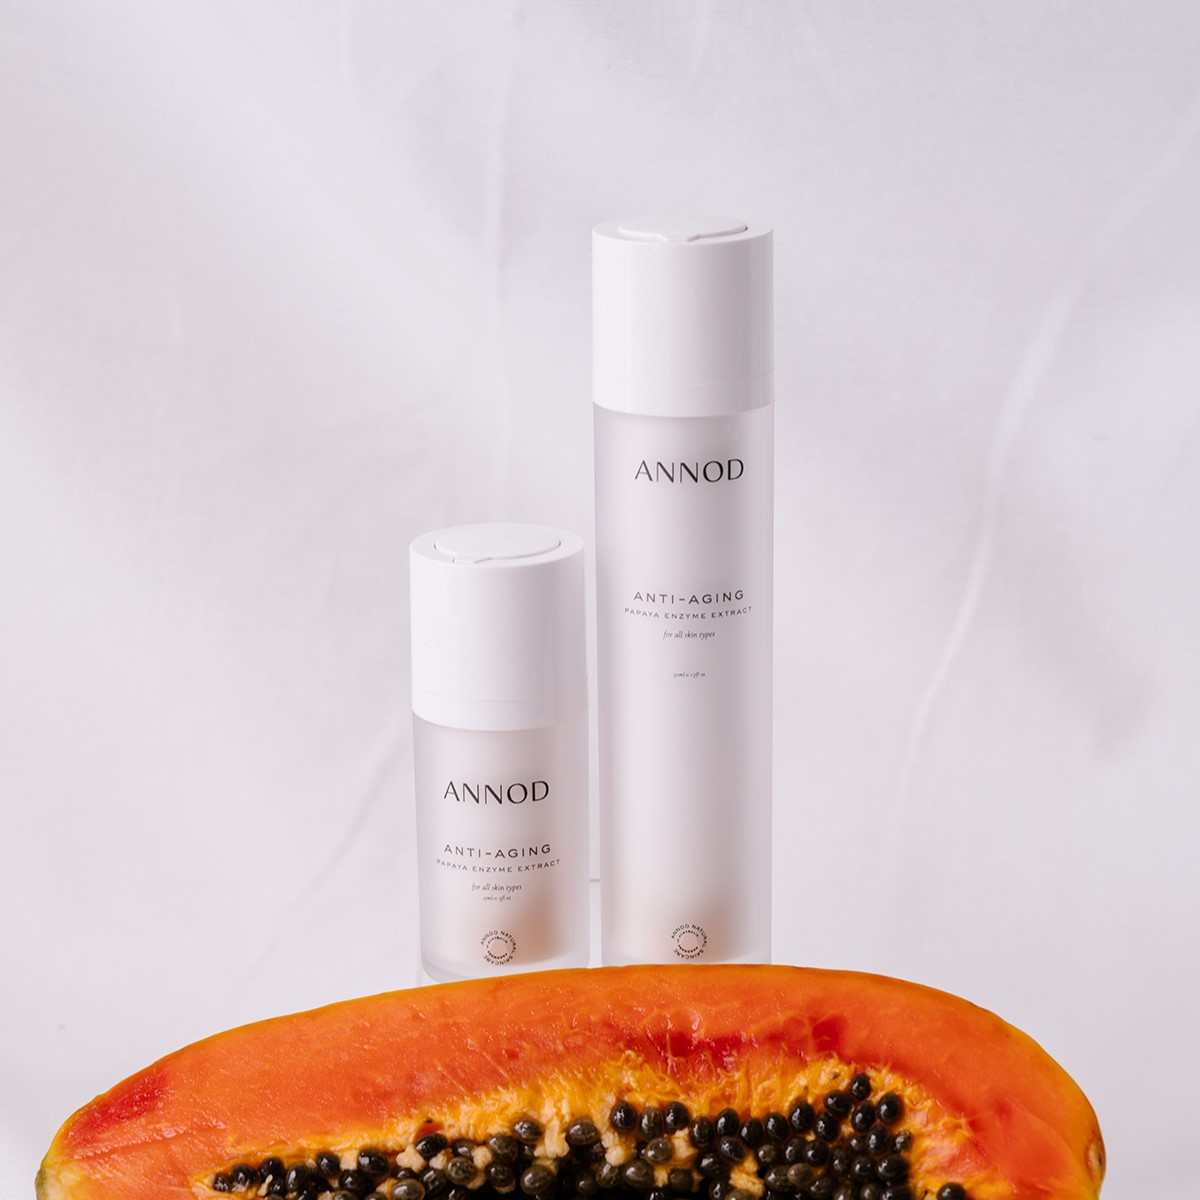 Annod Anti-Aging Papaya Enzyme Extract